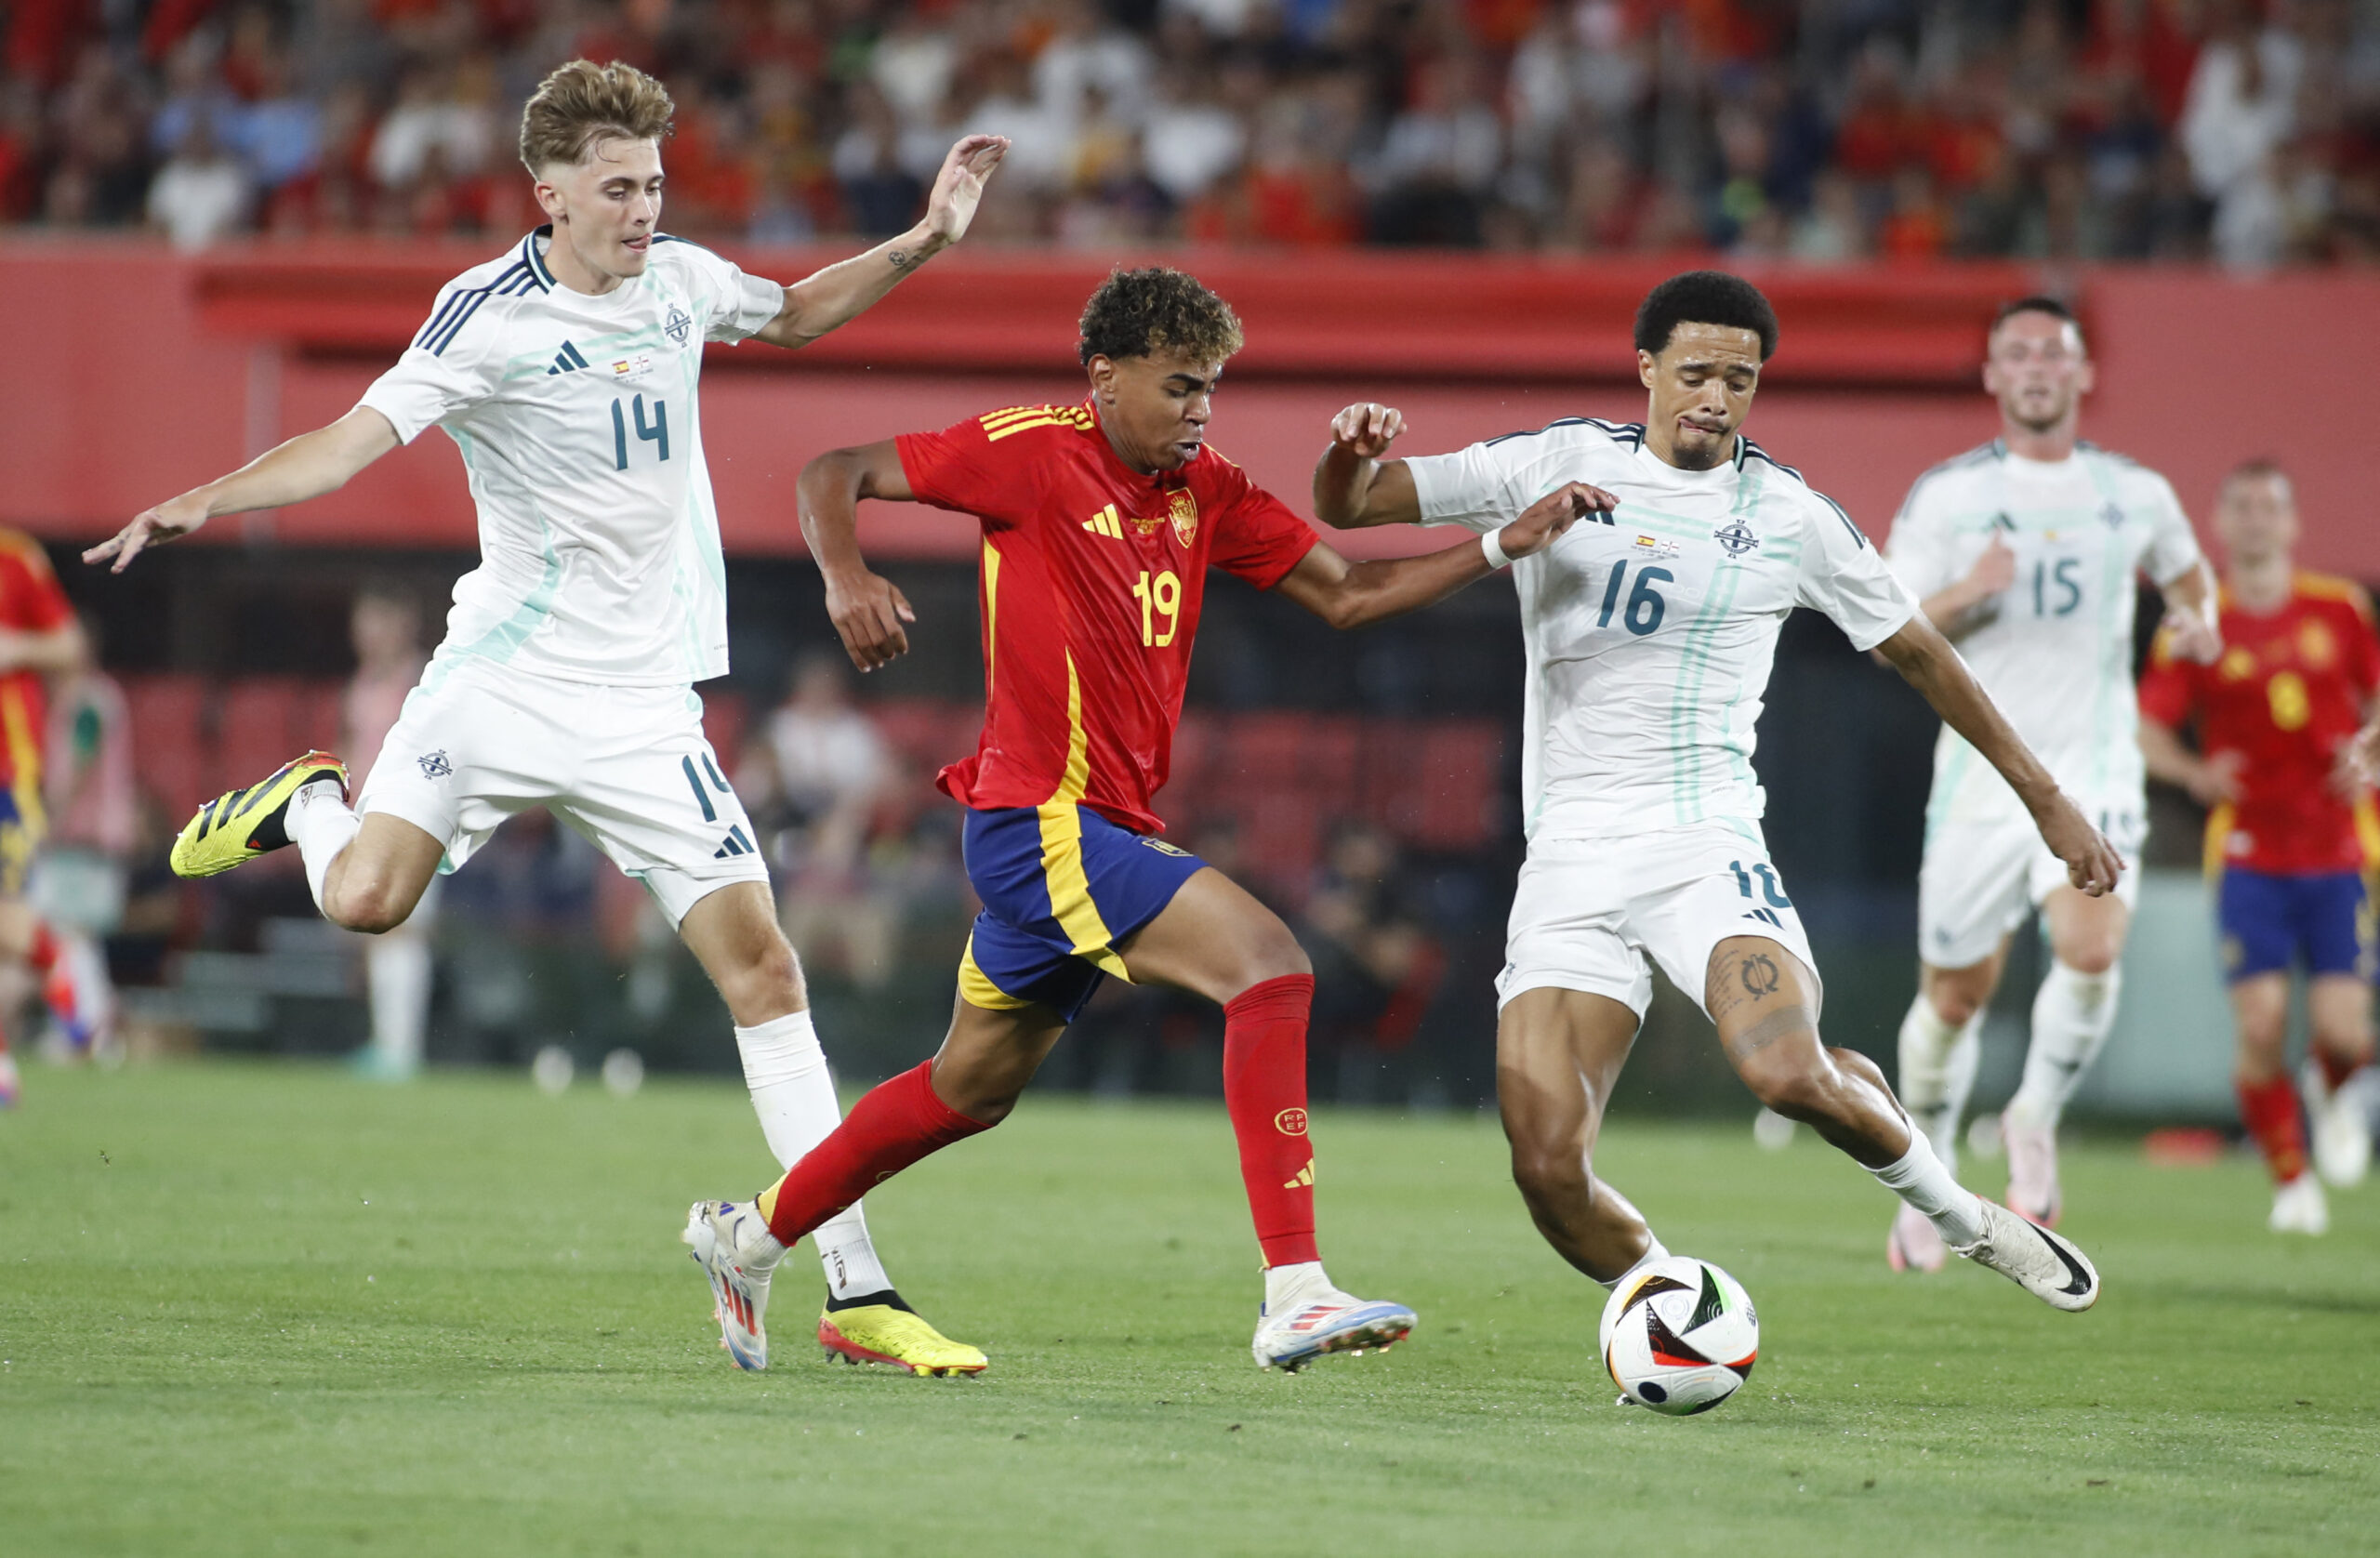 Spain's forward #19 Lamine Yamal fights for the ball with Northern Ireland's midfielder #14 Isaac Price and Northern Ireland's defender #16 Jamal Lewis during the international friendly football match between Spain and North Ireland at Son Moix stadium in Palma de Mallorca on June 8, 2024.